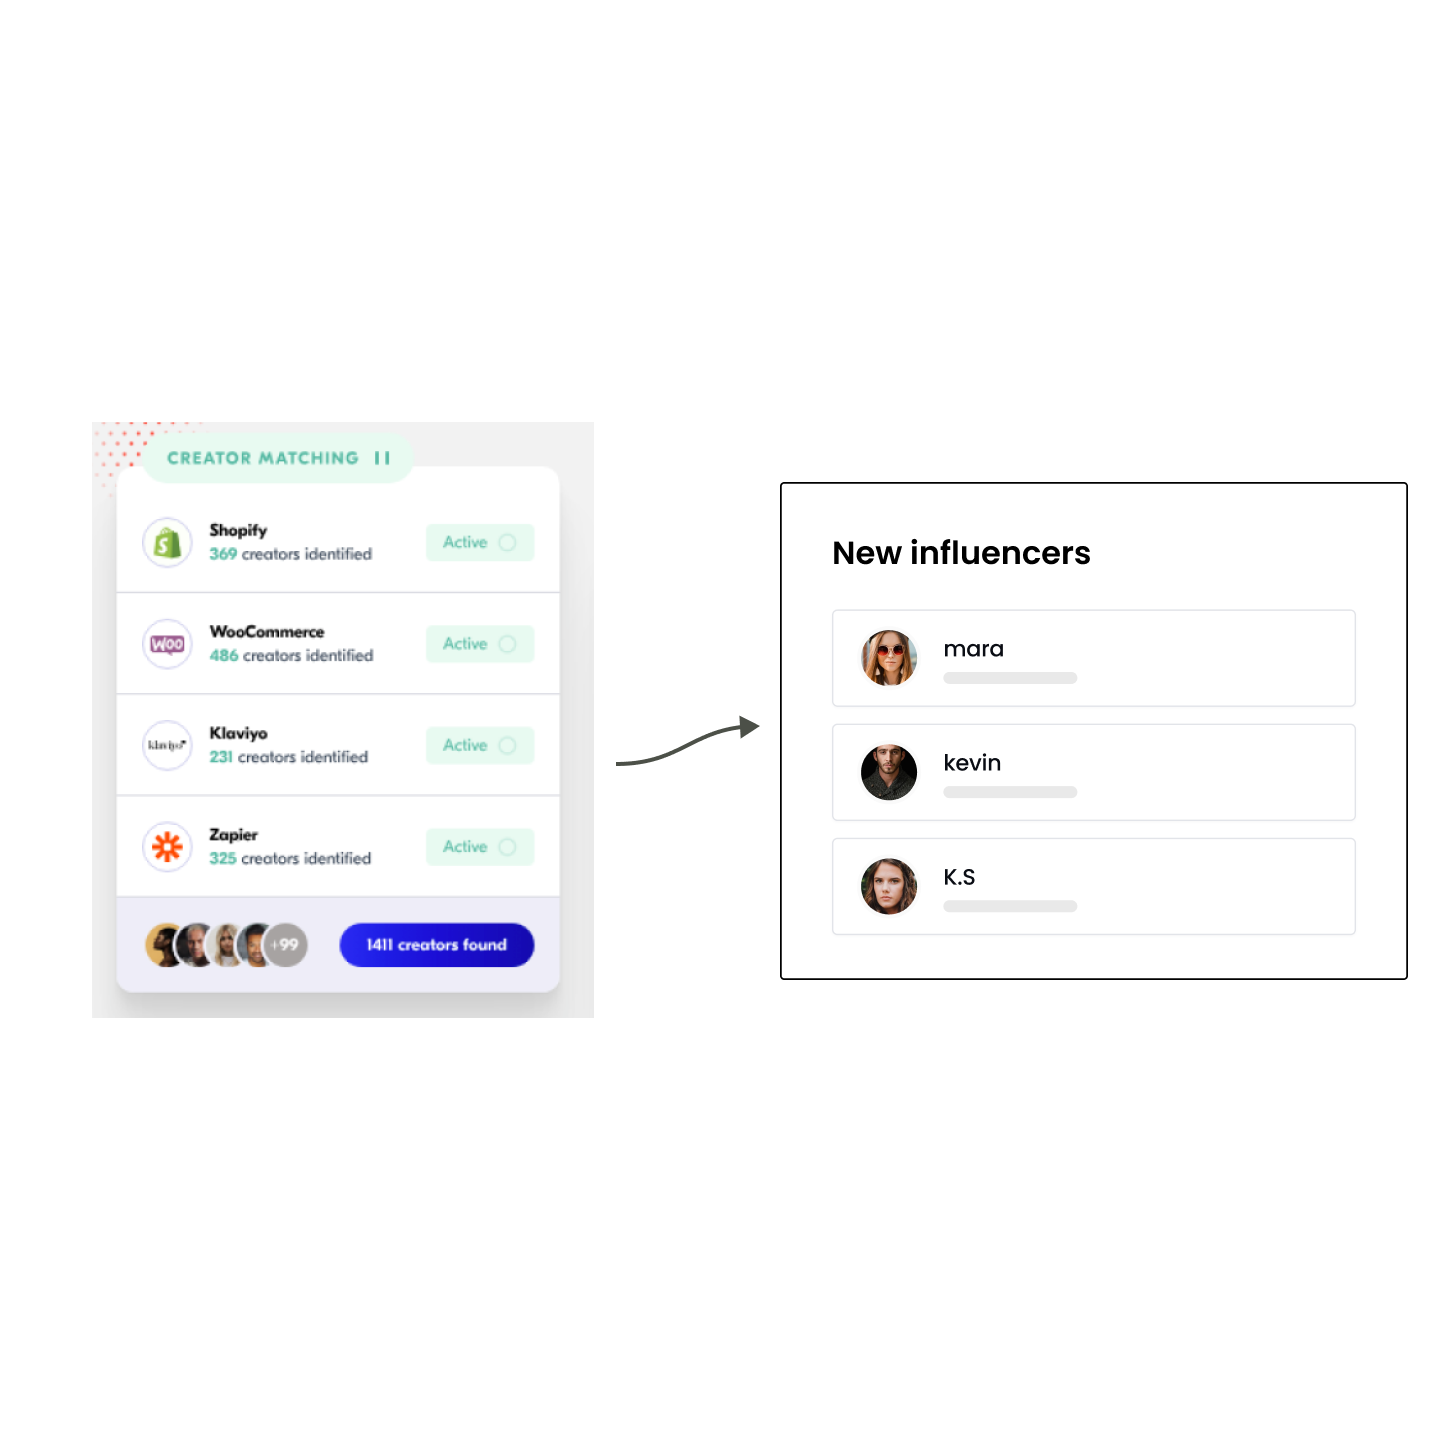 Automated recommendations for more influencers